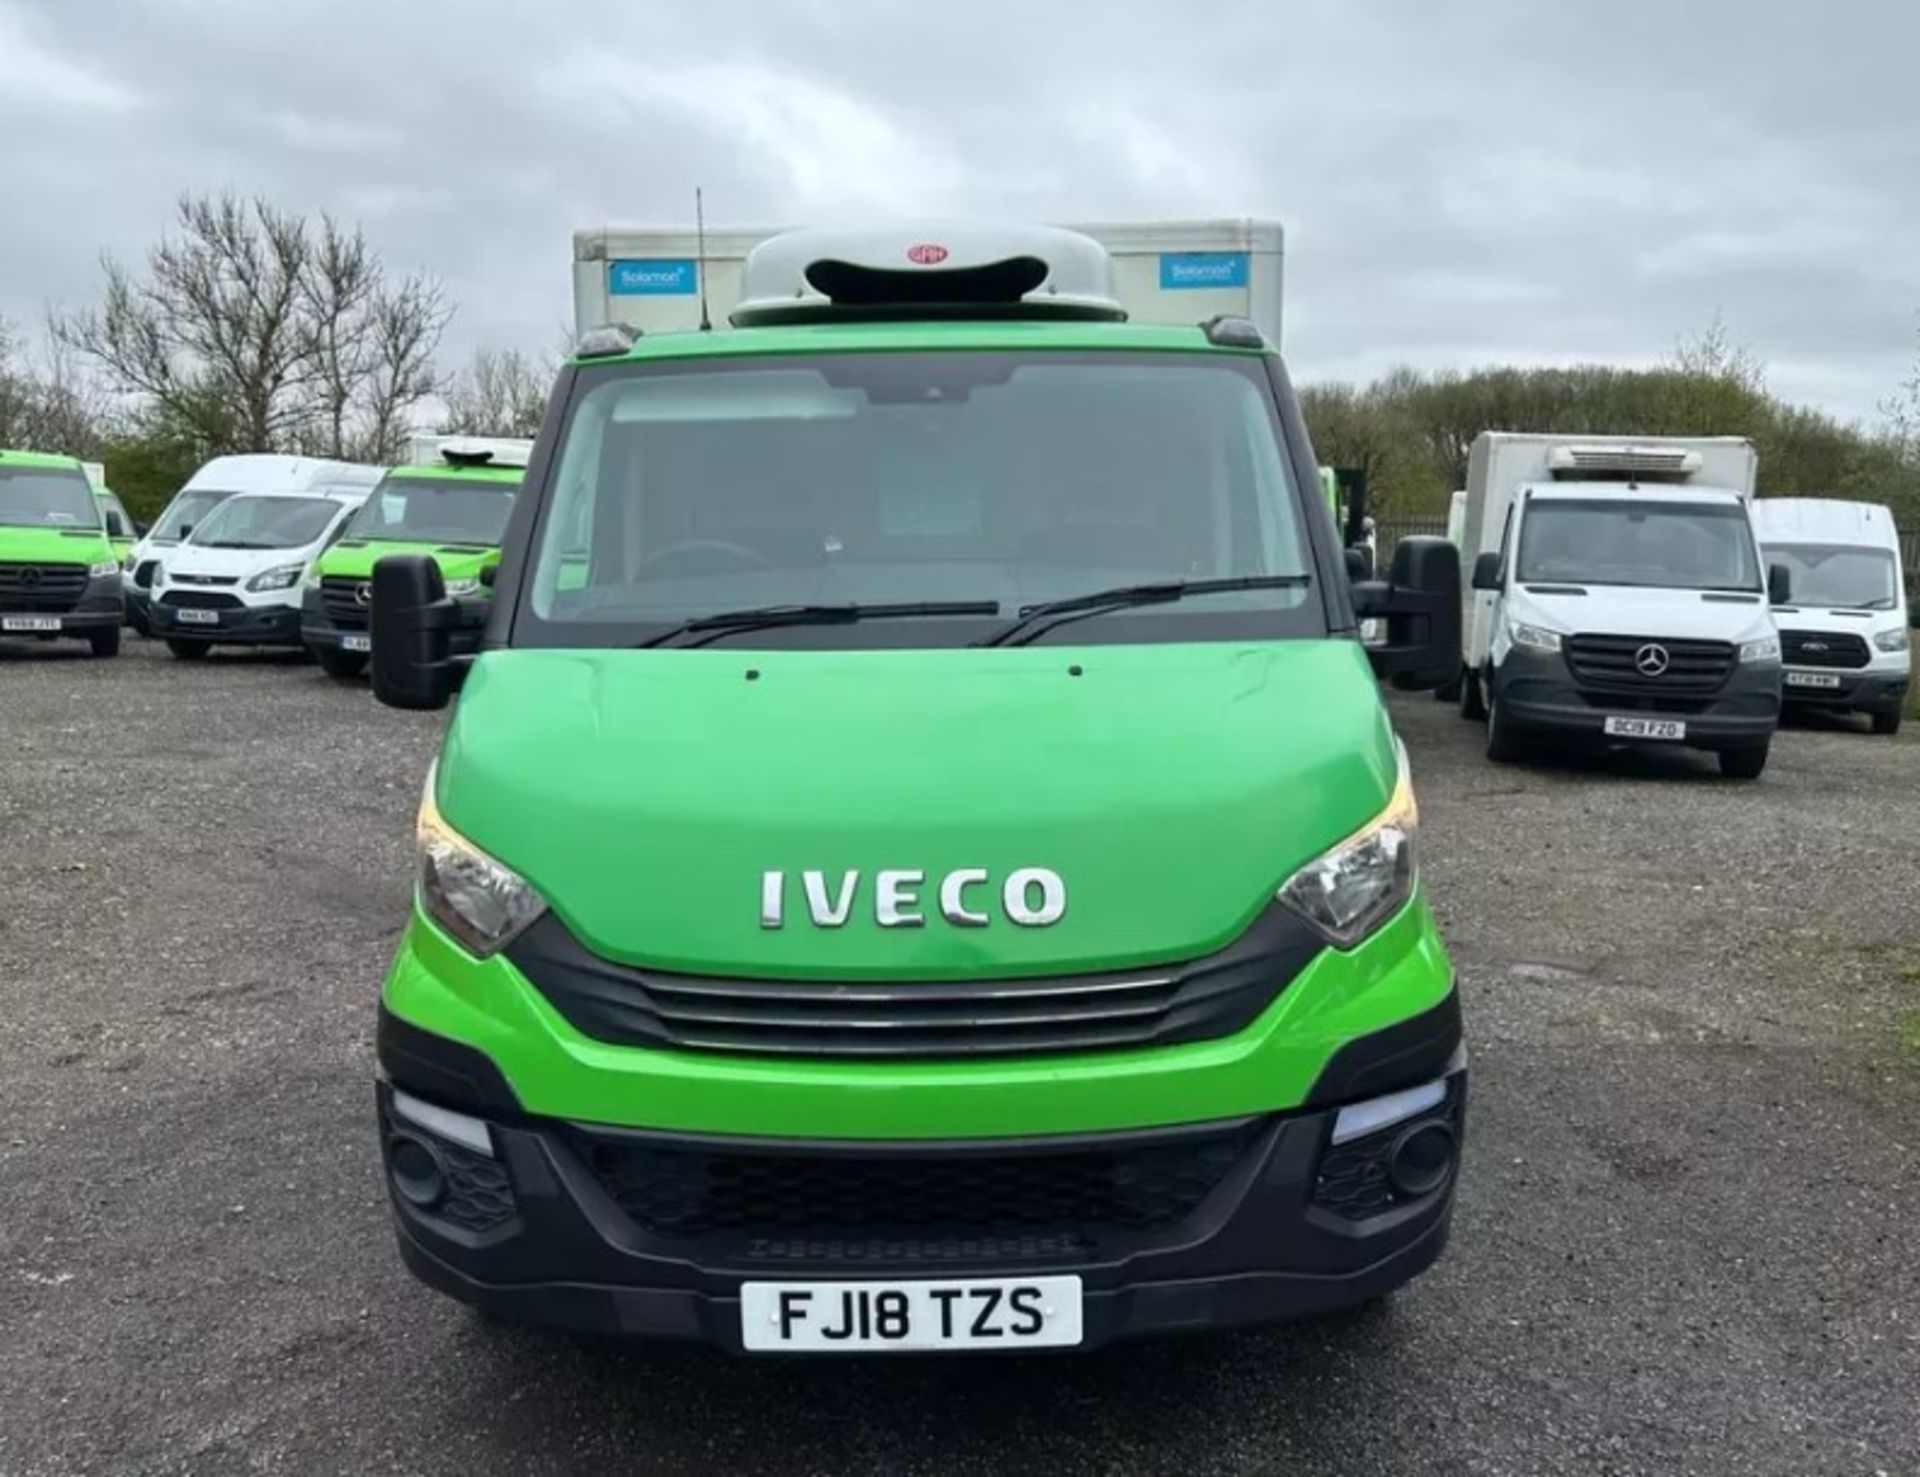 EXCEPTIONAL PERFORMANCE: 2018 IVECO DAILY 35S12 CHASSIS CAB - Image 2 of 15